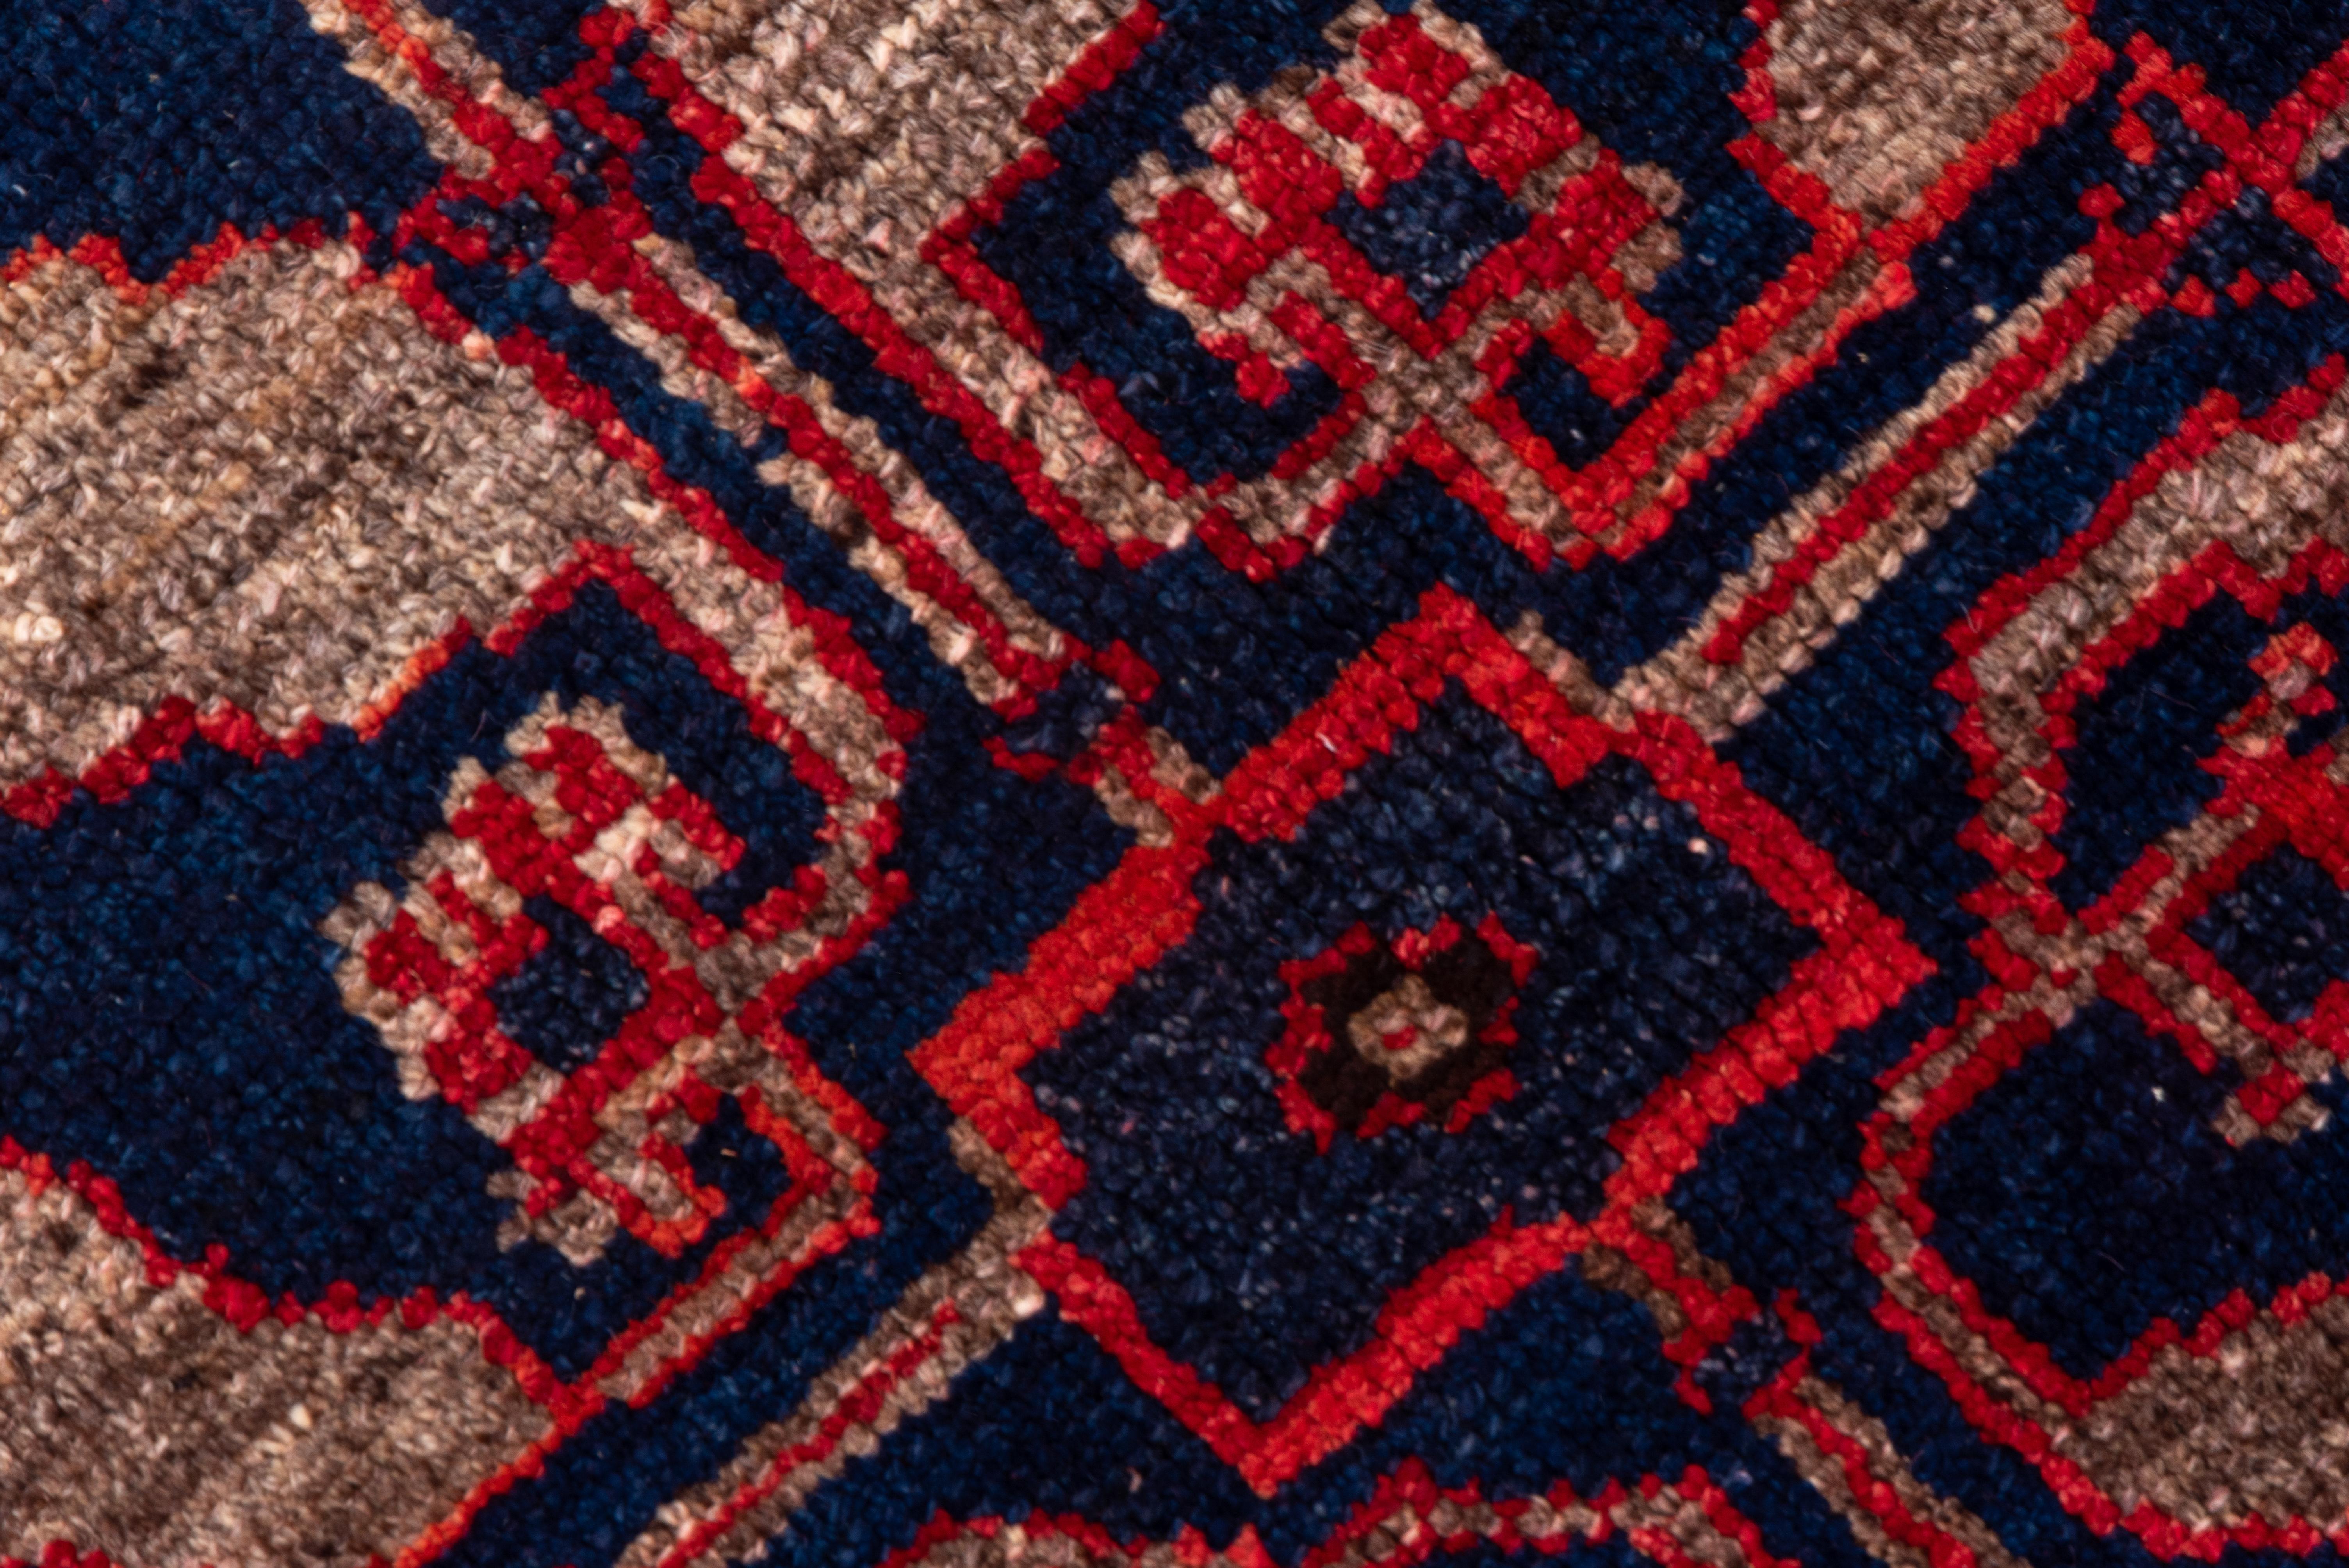 The spot worn, abrashed plain red field of this eastern Turkish piece features a pole medallion of three bold light grey and royal blue diamonds, all framed by a light grey border with a square Meander embracing fat crosses, rosettes and fringed